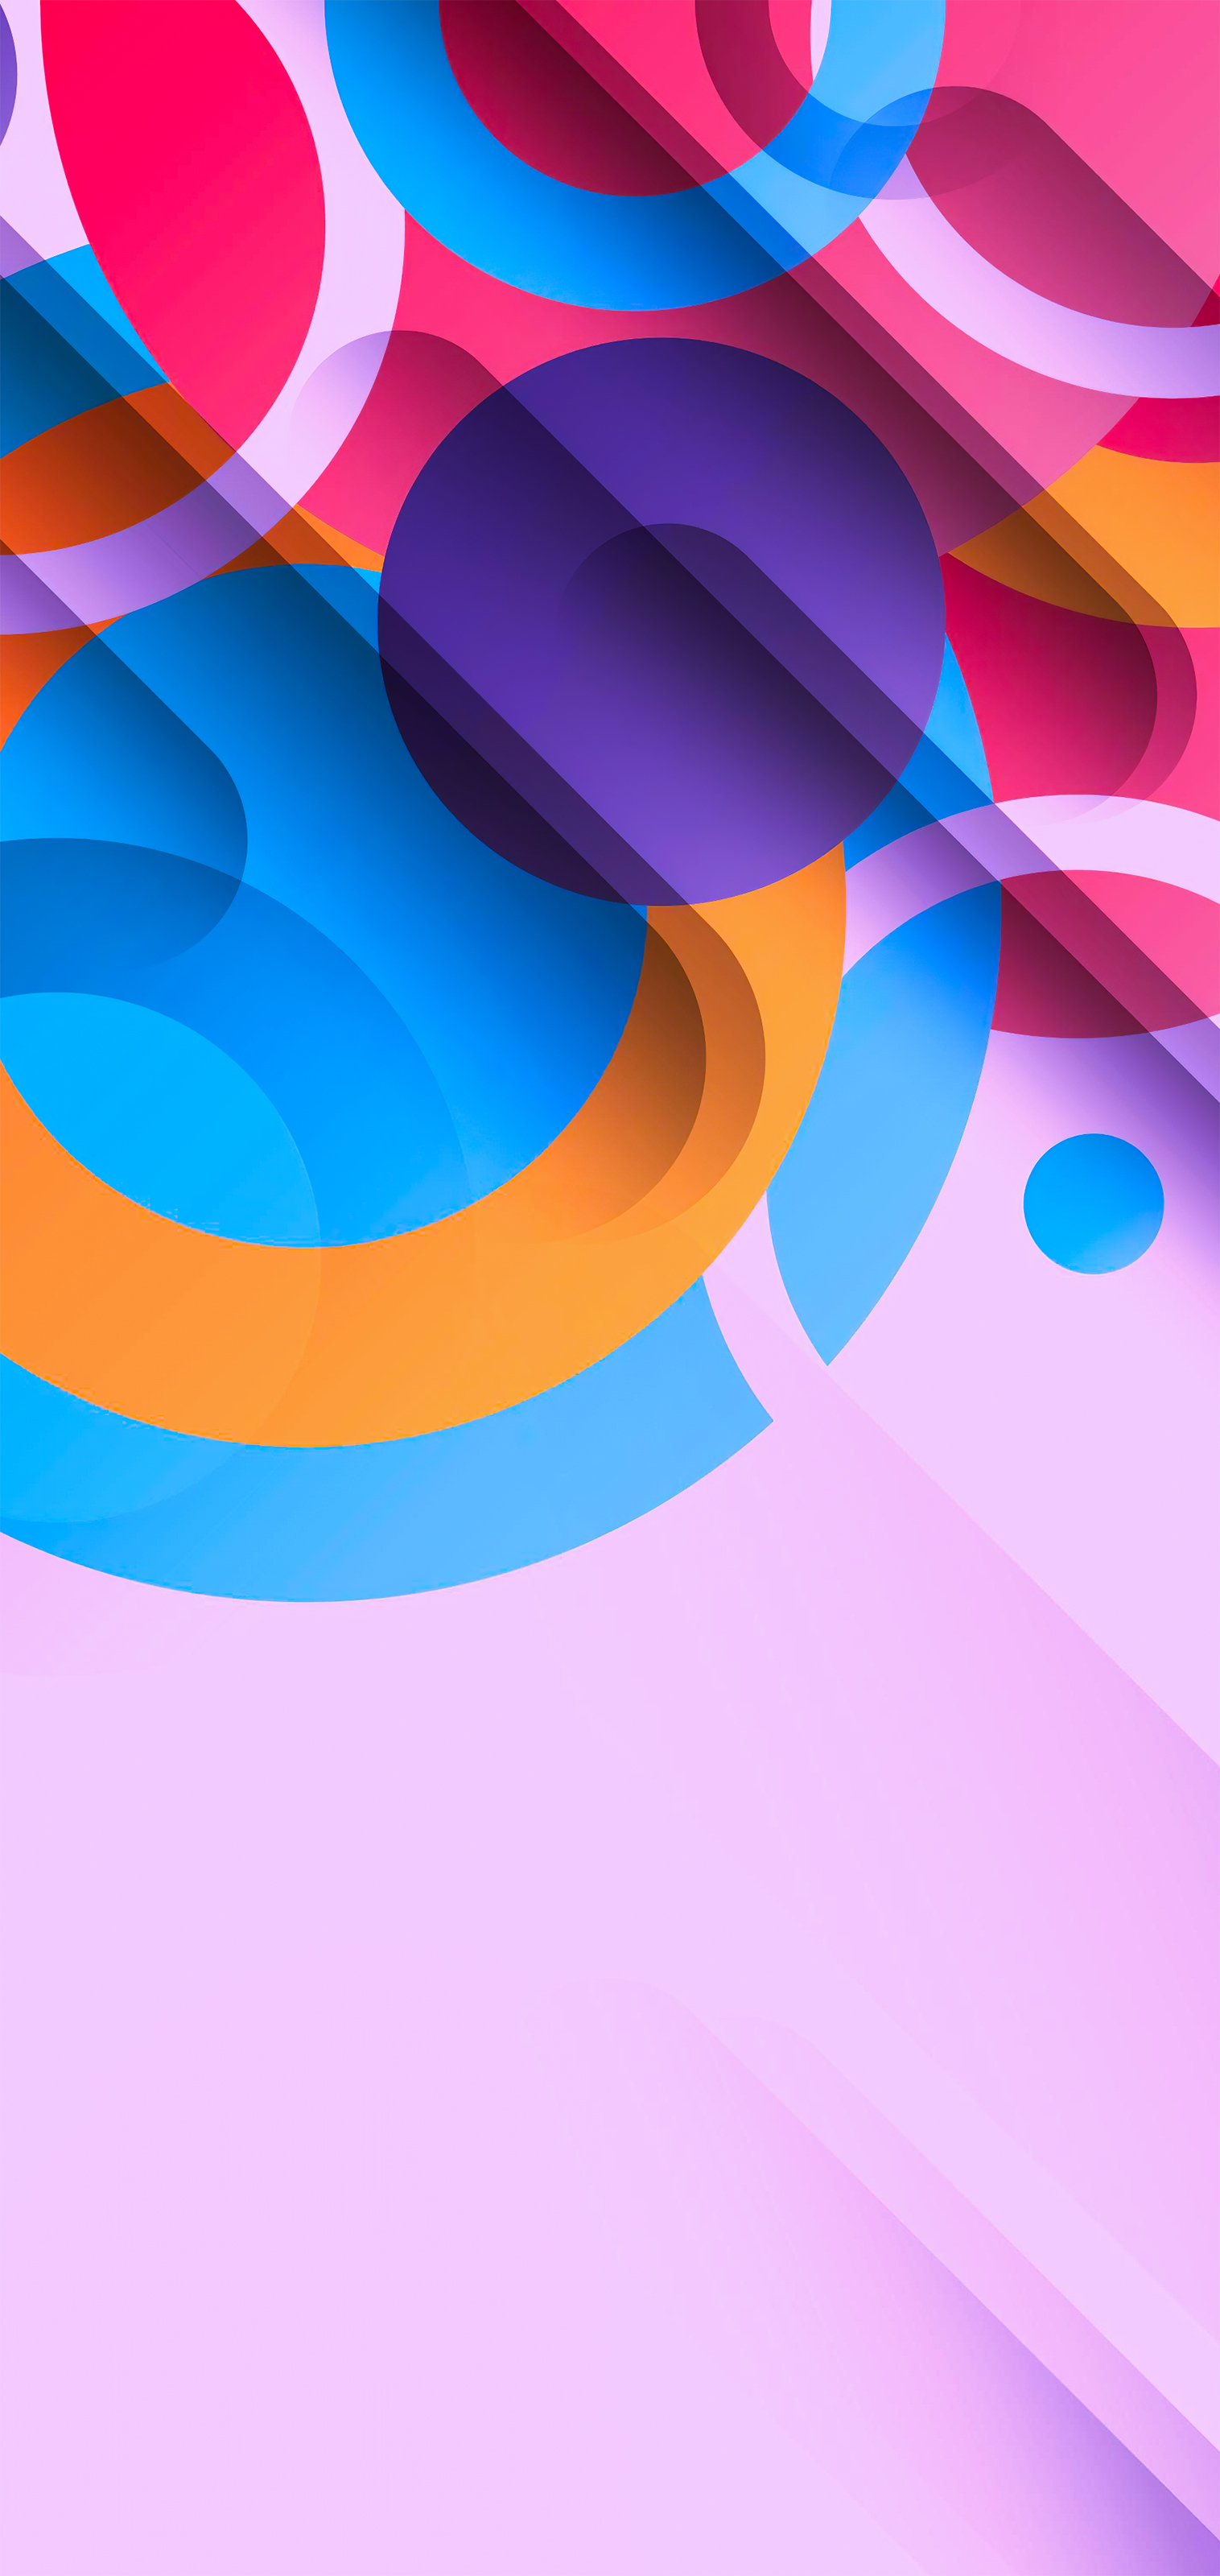 1516x3200 Abstract wallpapers with geometric colors and shapes for iPhone